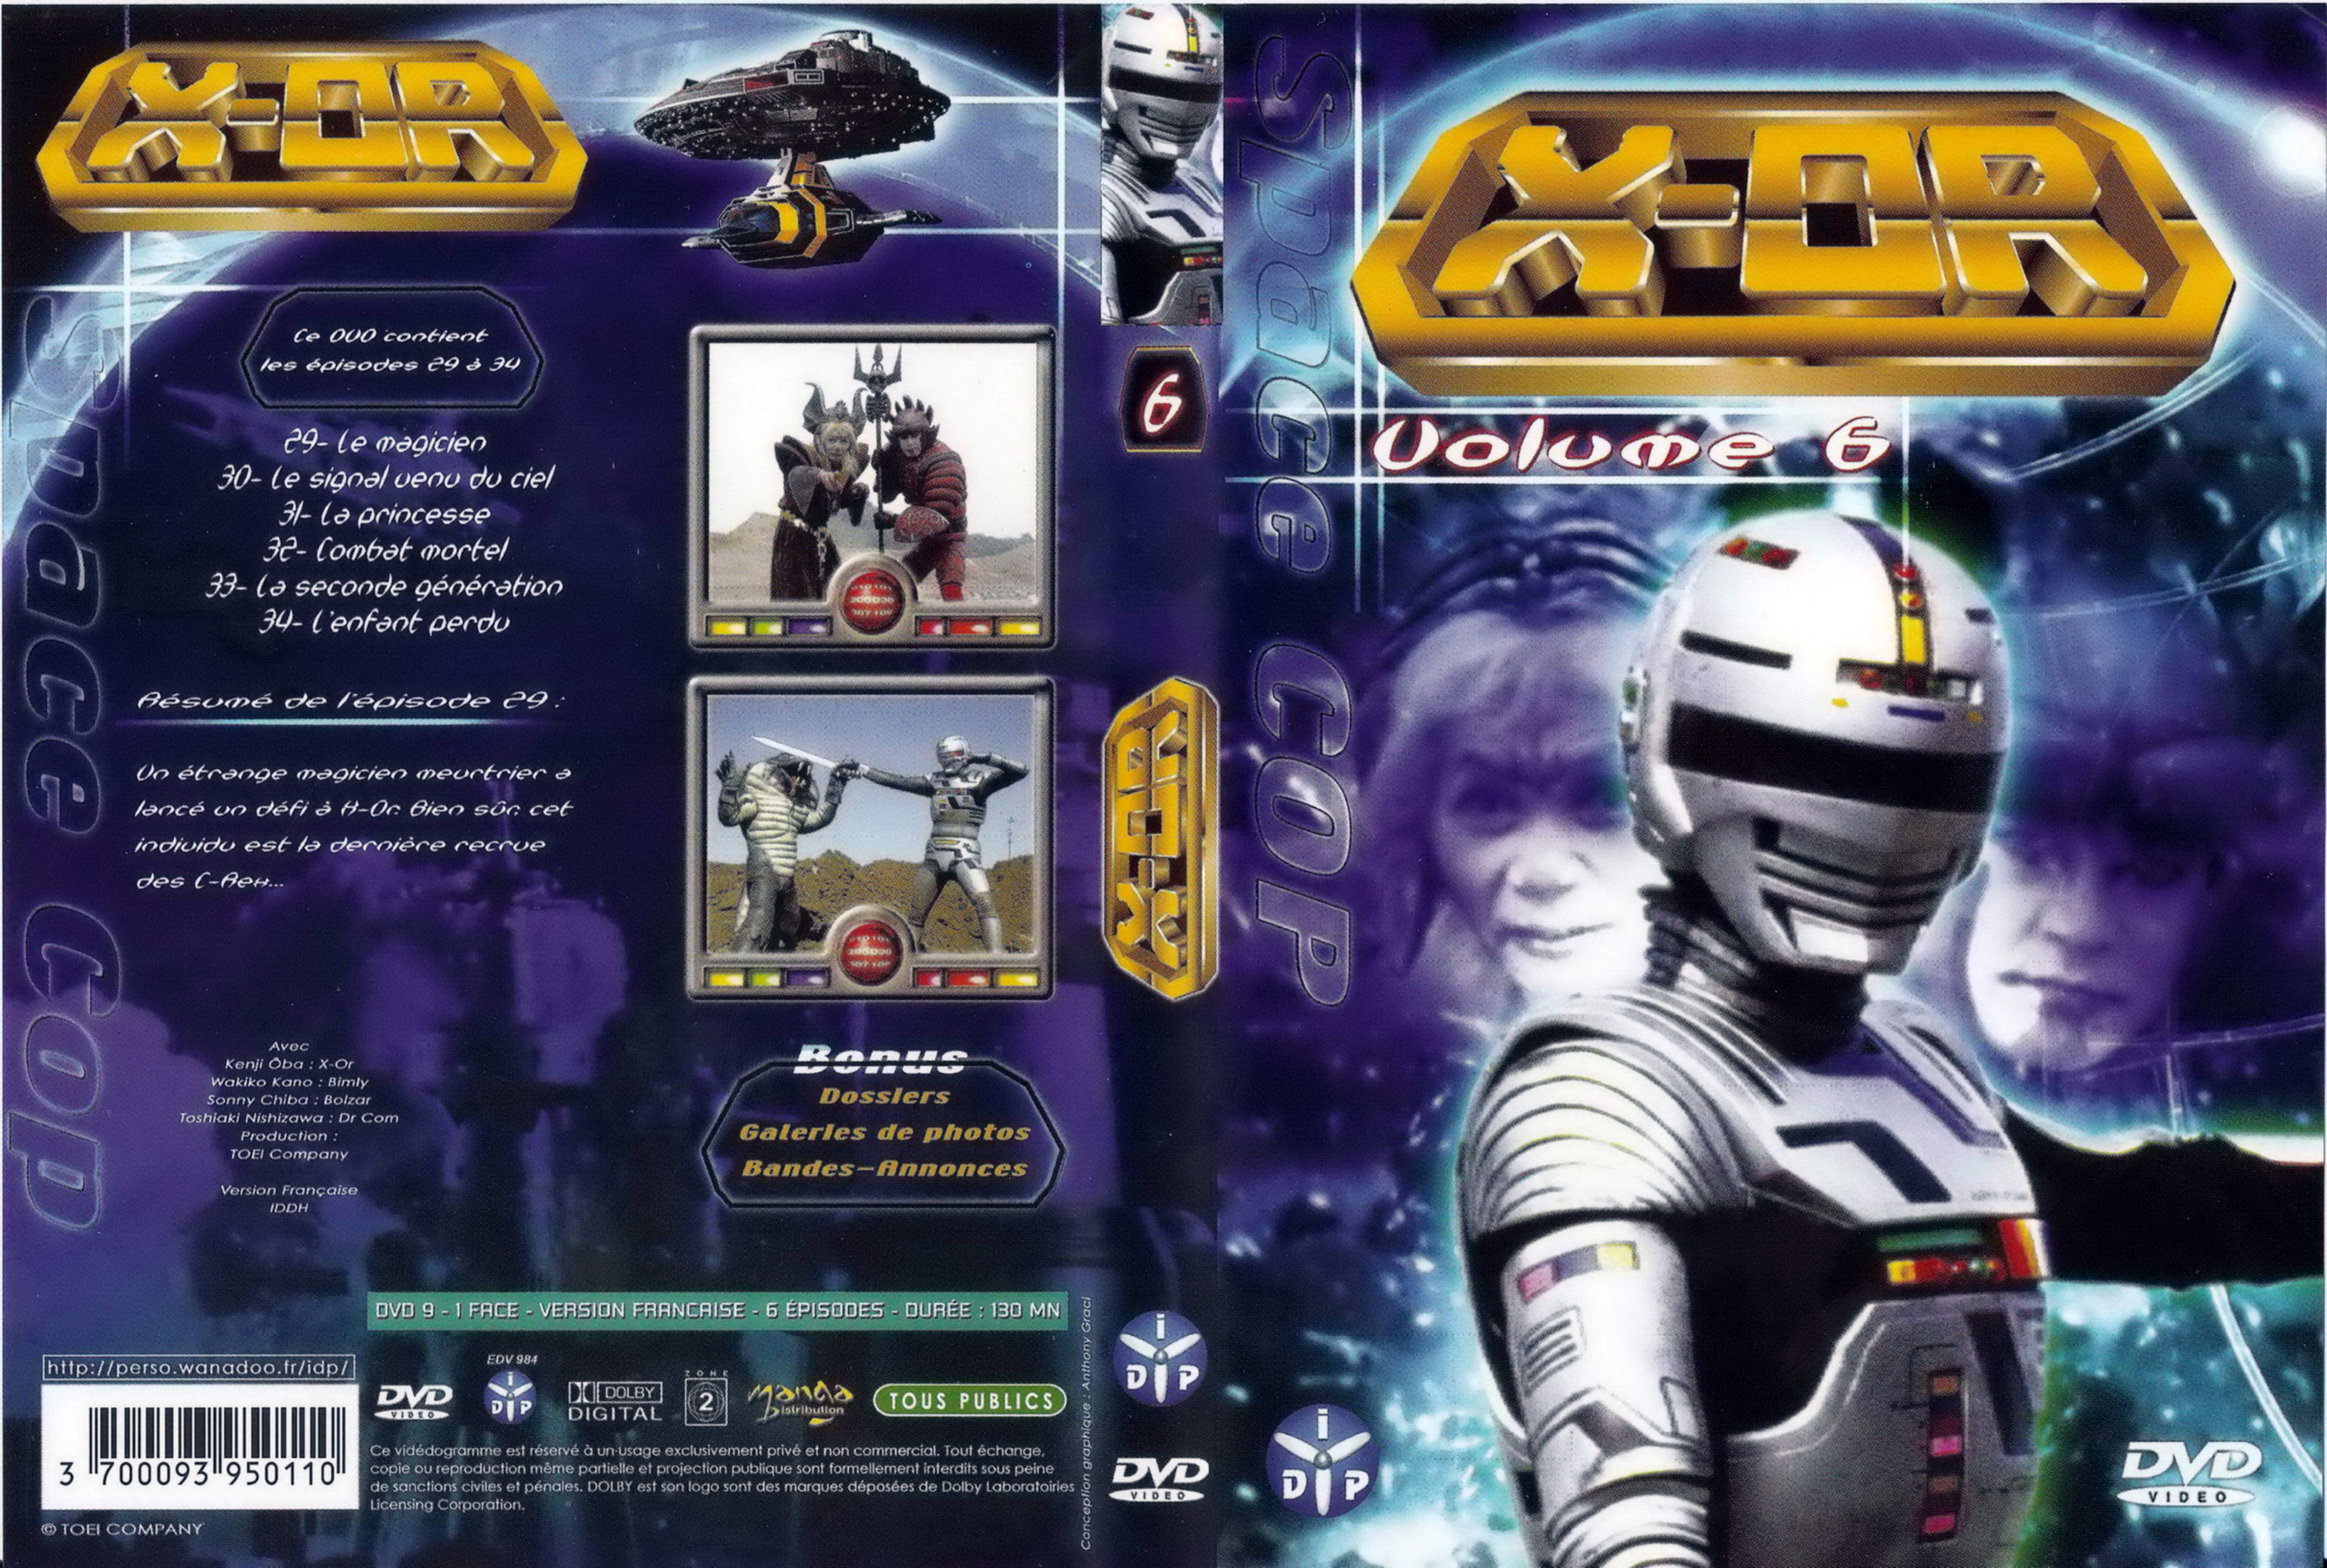 Jaquette DVD X-or vol 06